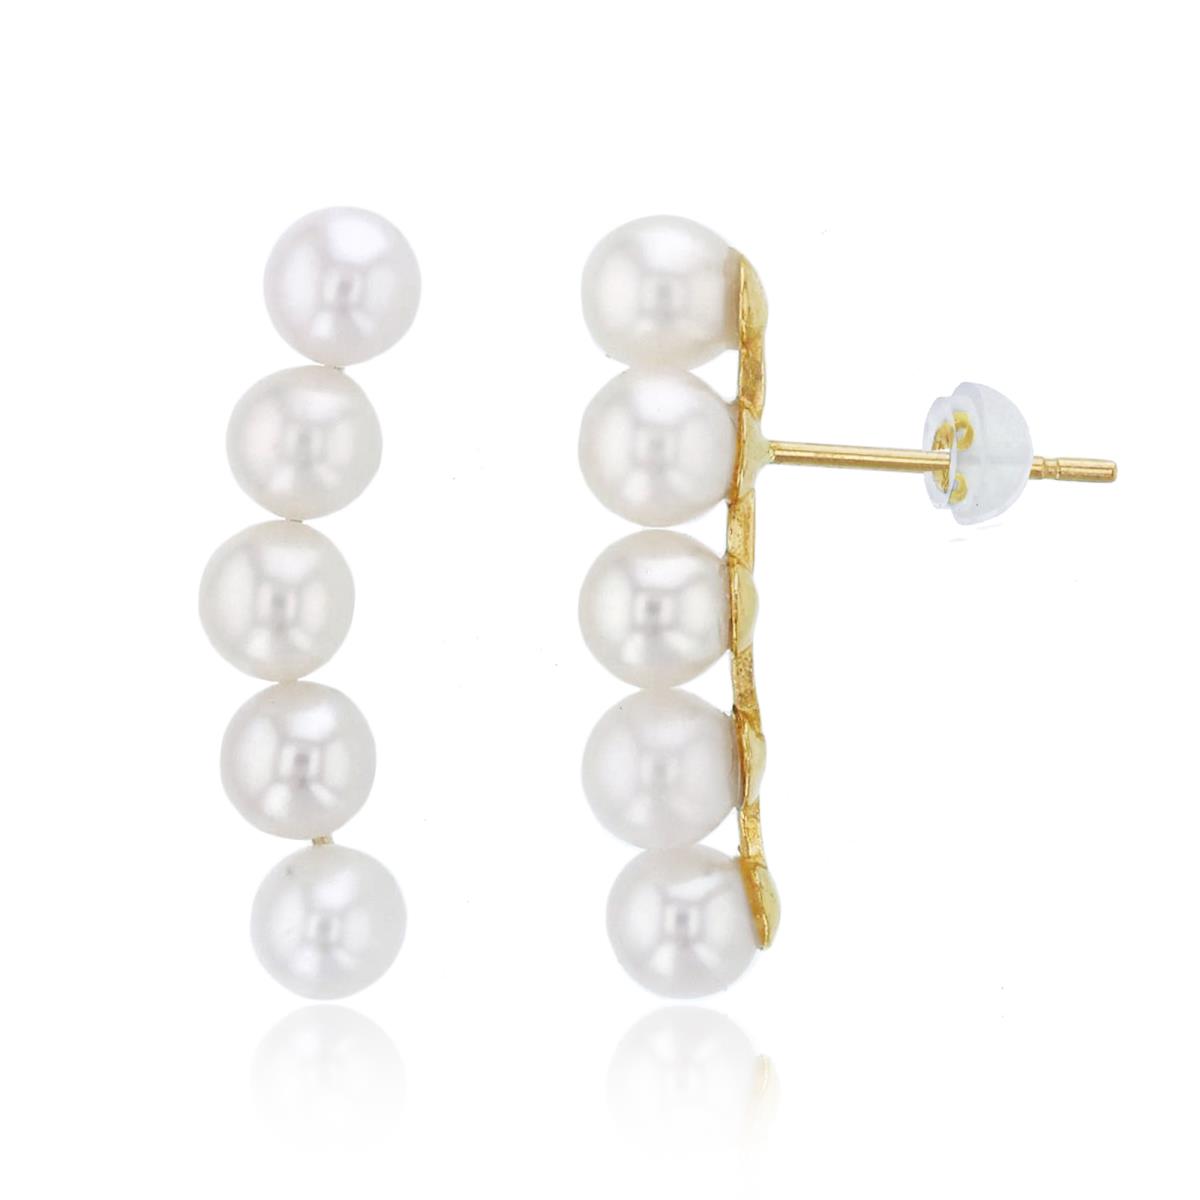 14K Yellow Gold 4mm Rnd Fresh Water Pearl Crawl Earrings with Silicon Backs